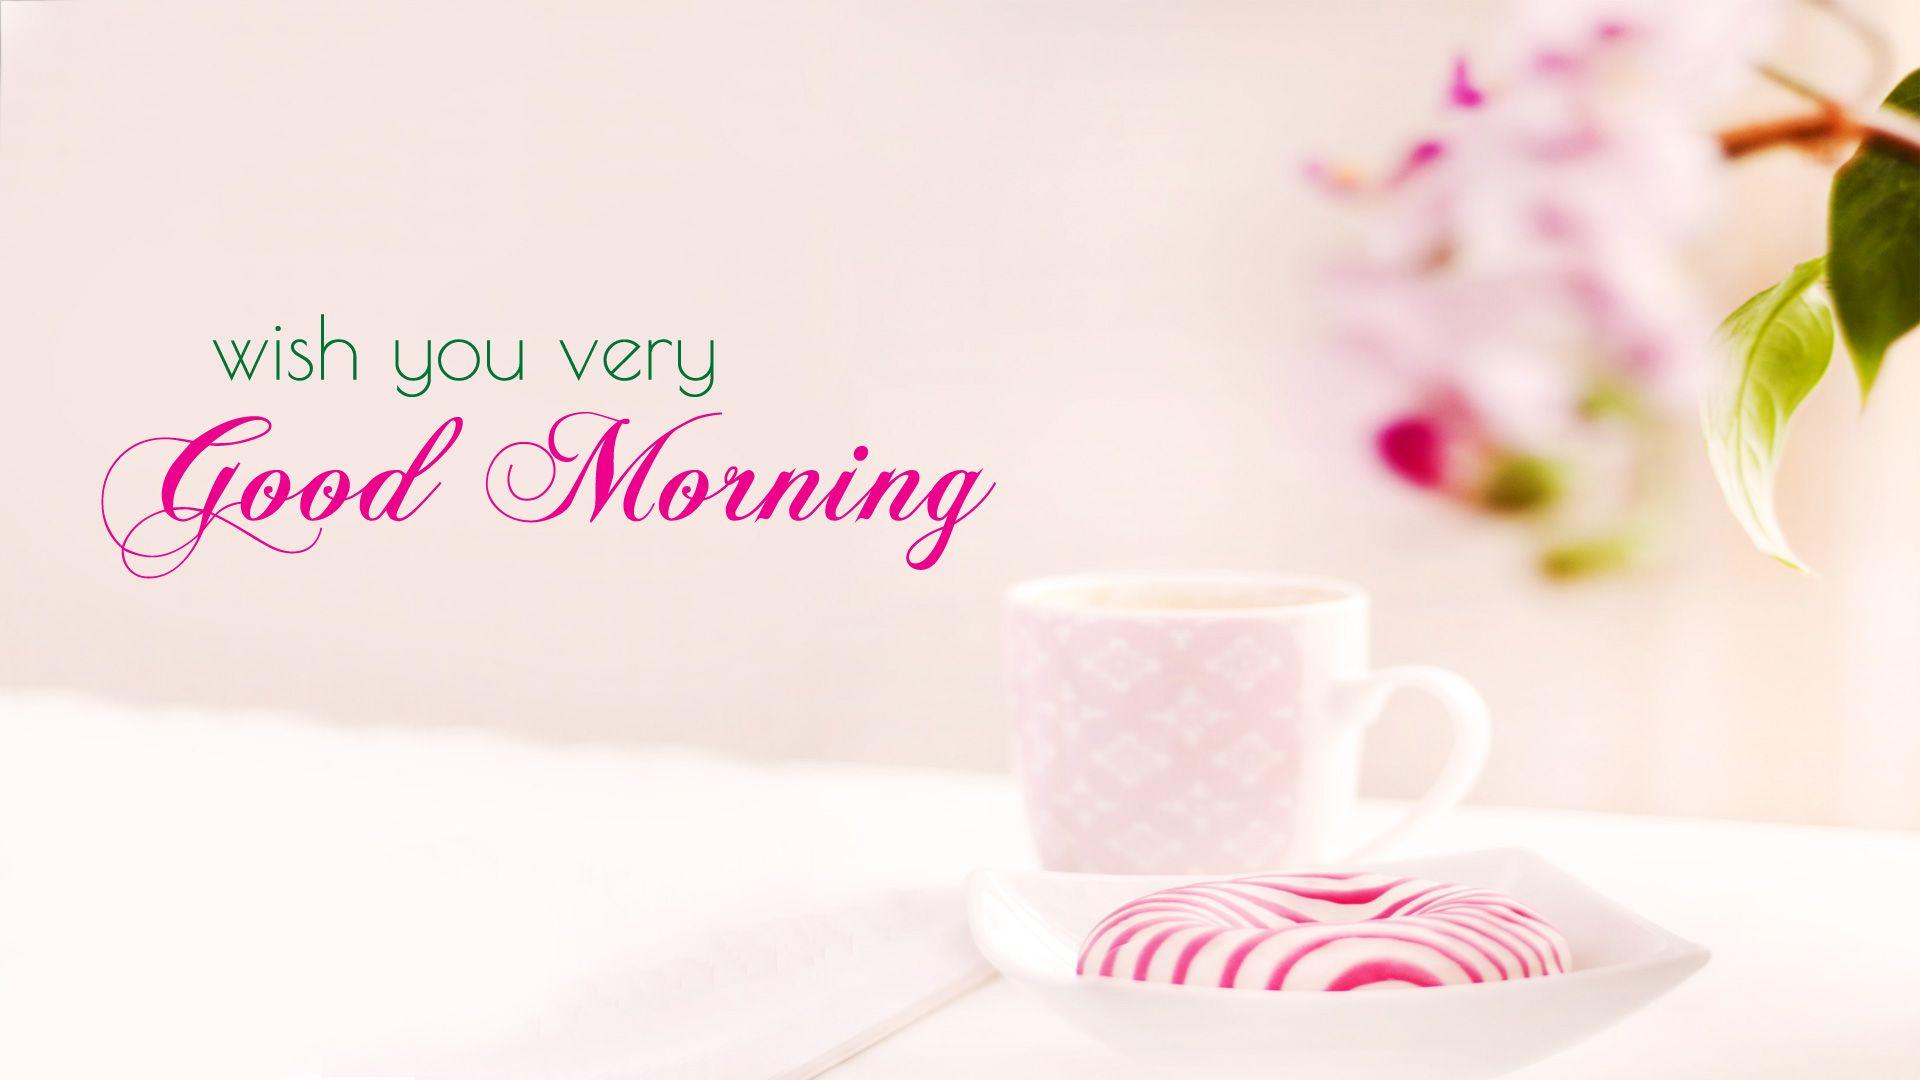 Good Morning Wallpaper with Flowers, Full HD 1920x1080 GM Image